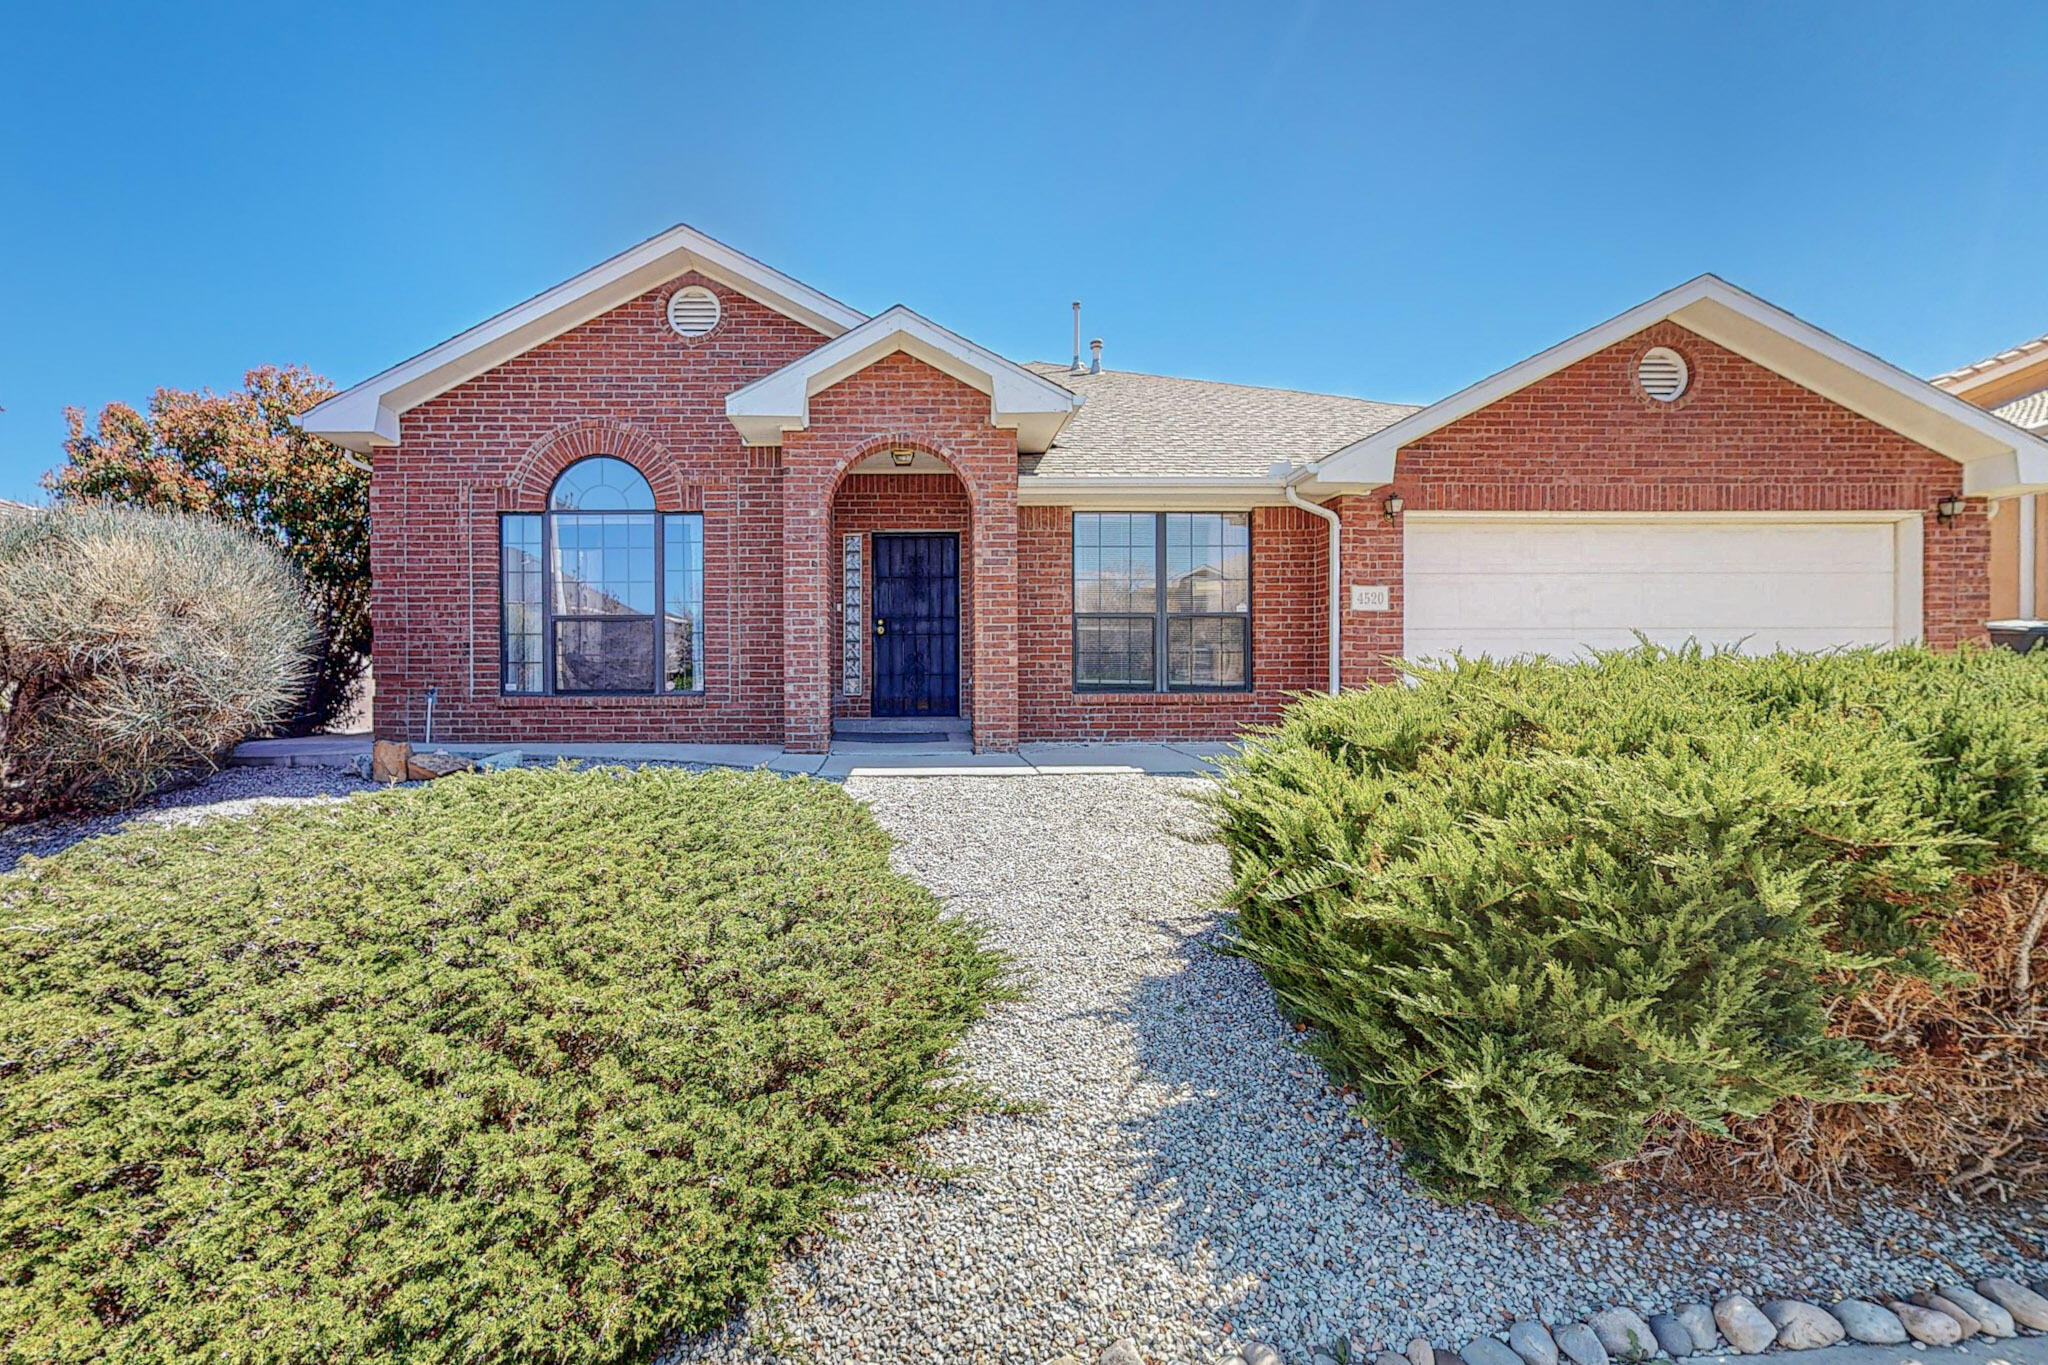 4520 N Harpers Ferry Ct NW, Albuquerque, NM 